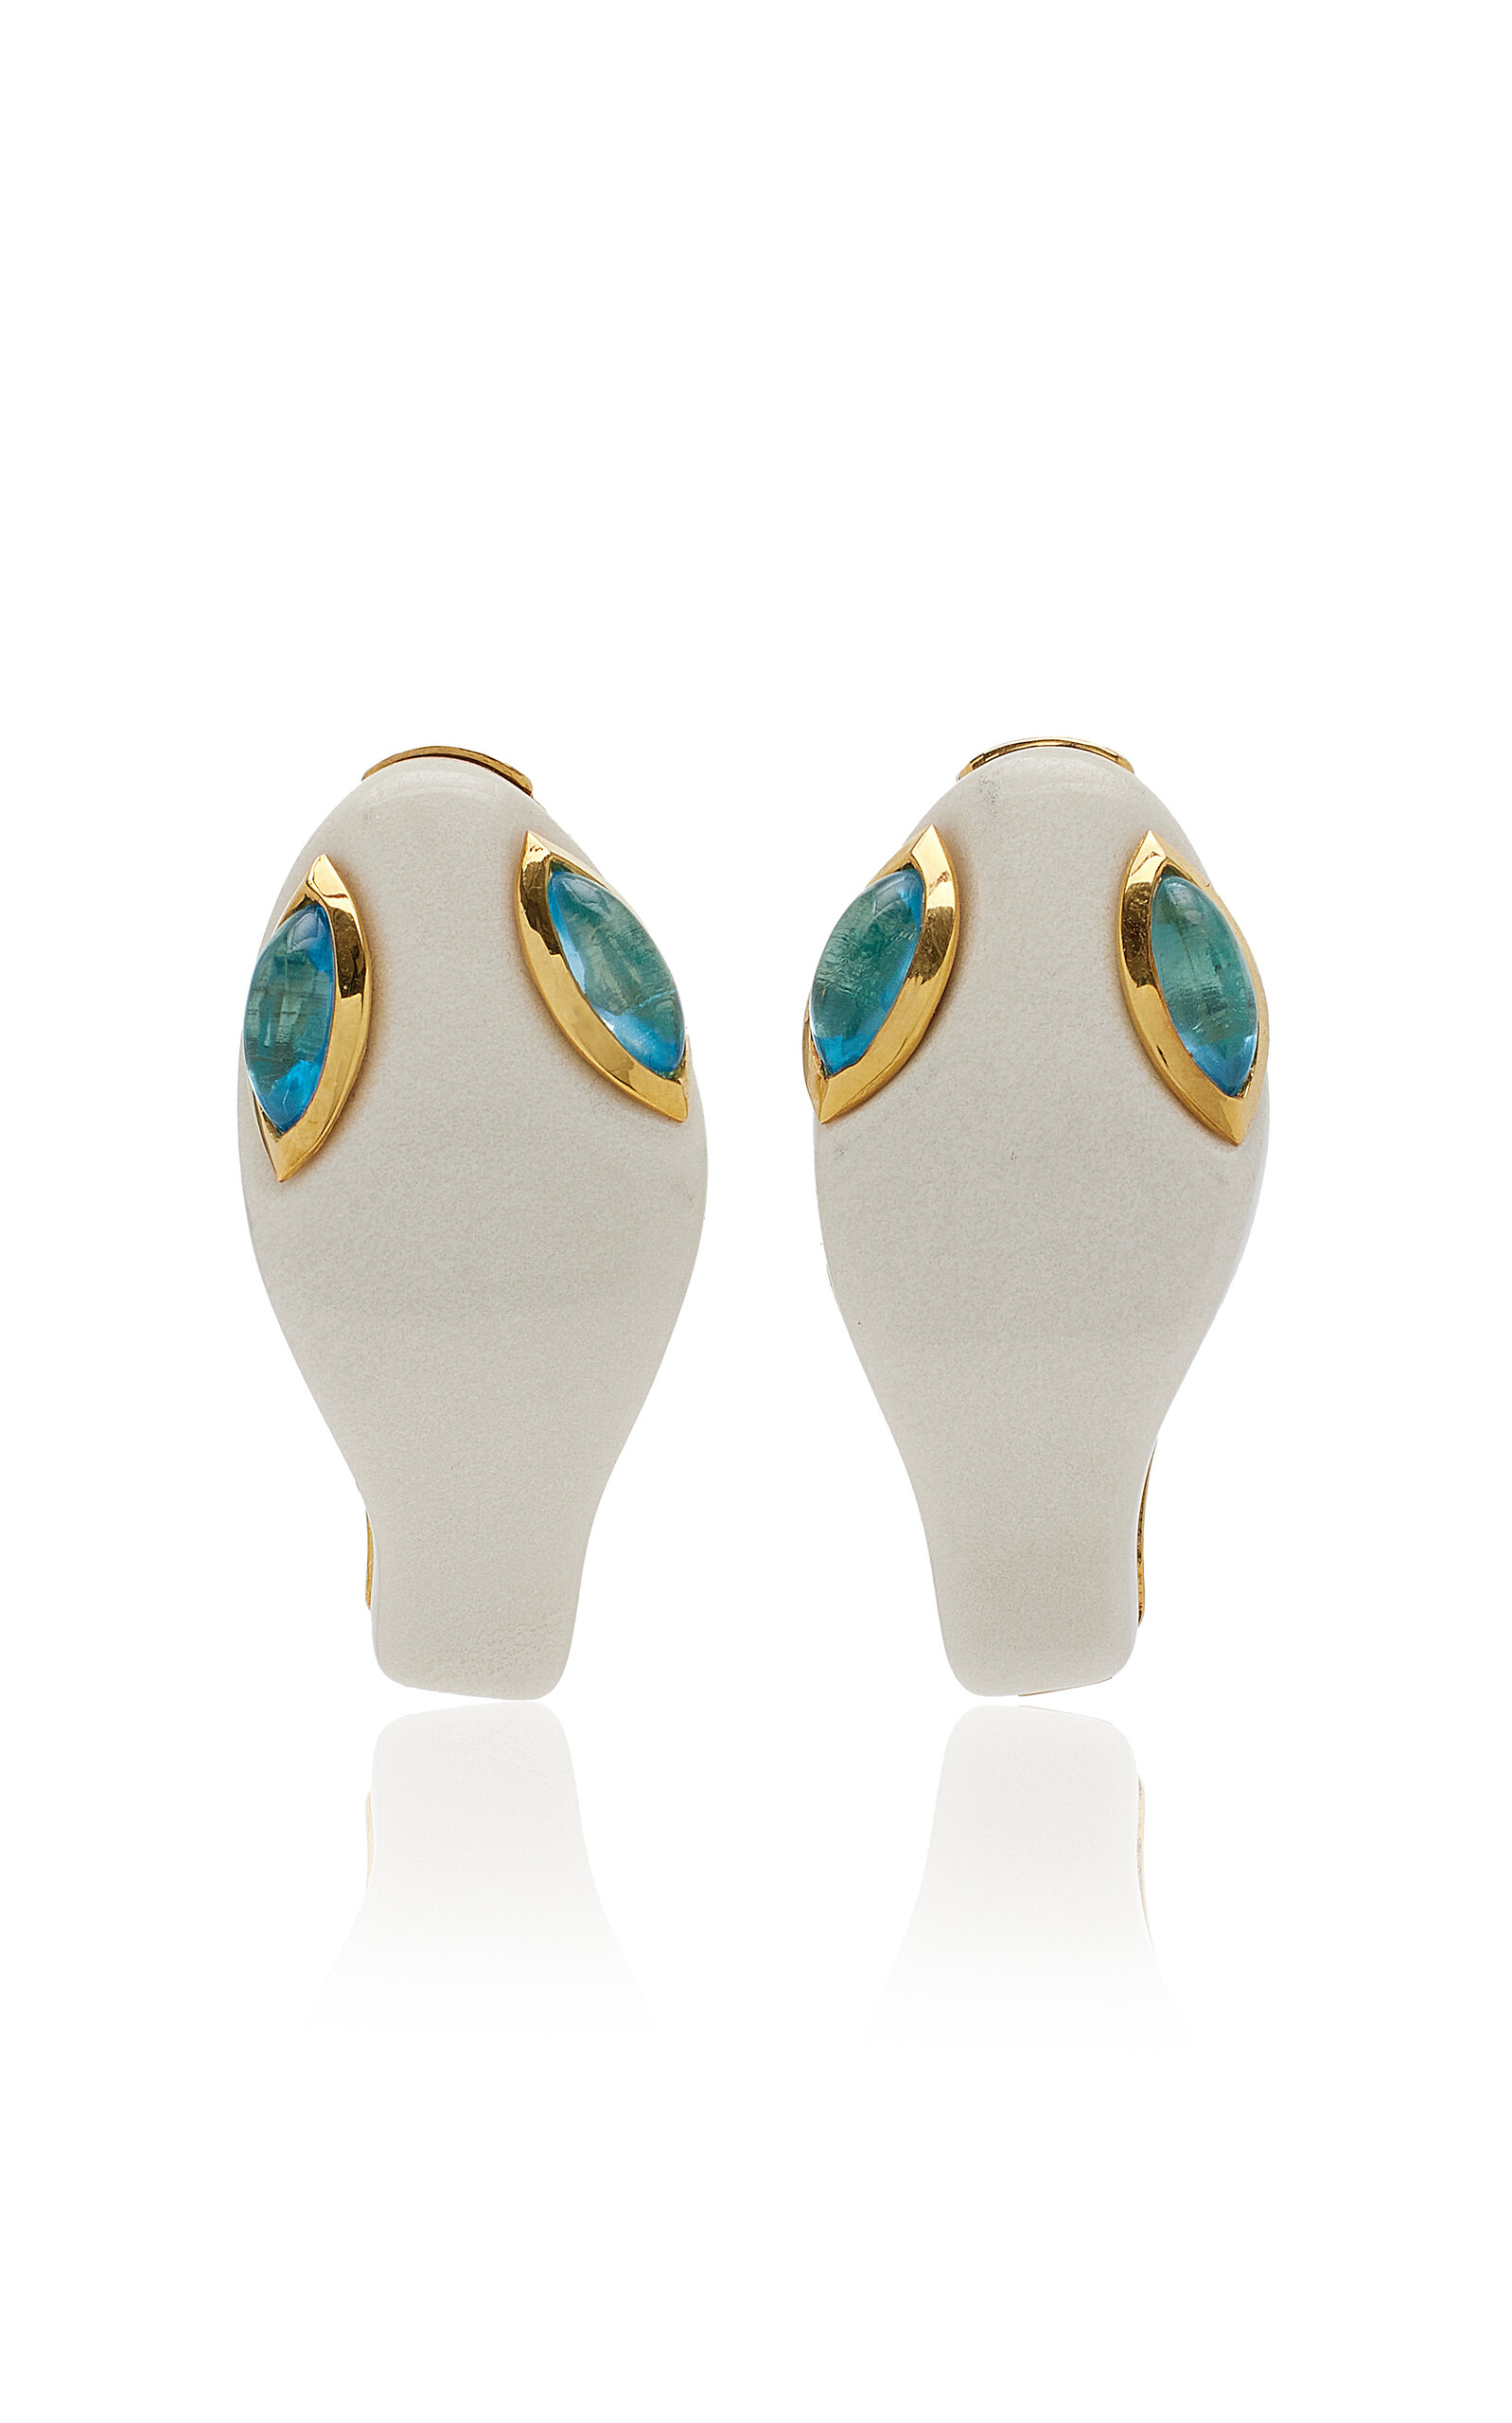 18K Yellow Gold Serpente White agate and Blue topaz Earrings